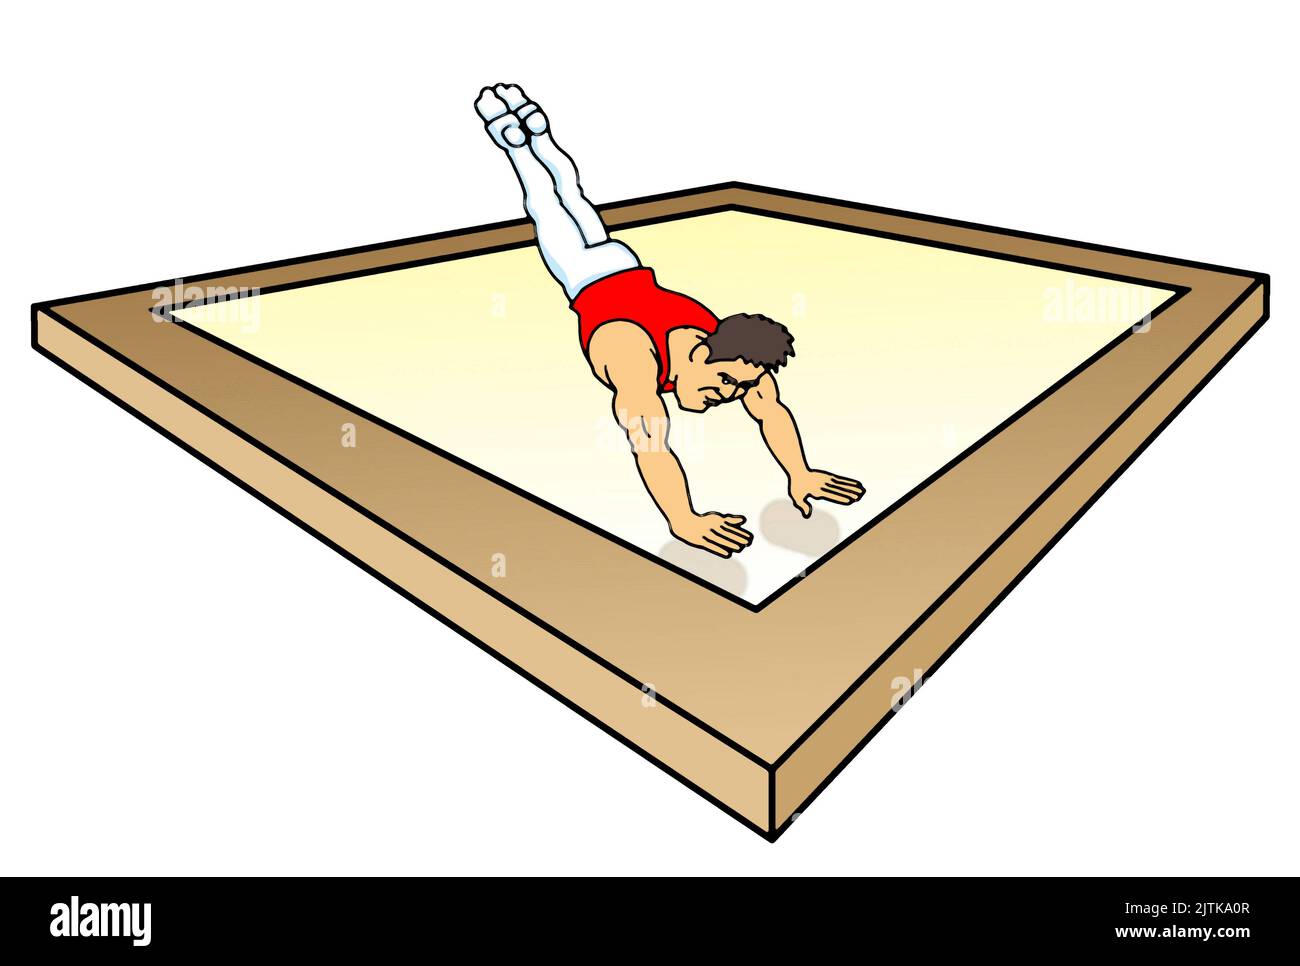 Series of art / illustrations, showing male athlete carrying out one of the Olympic men's gymnastics events. Here he takes part in the floor exercises Stock Photo